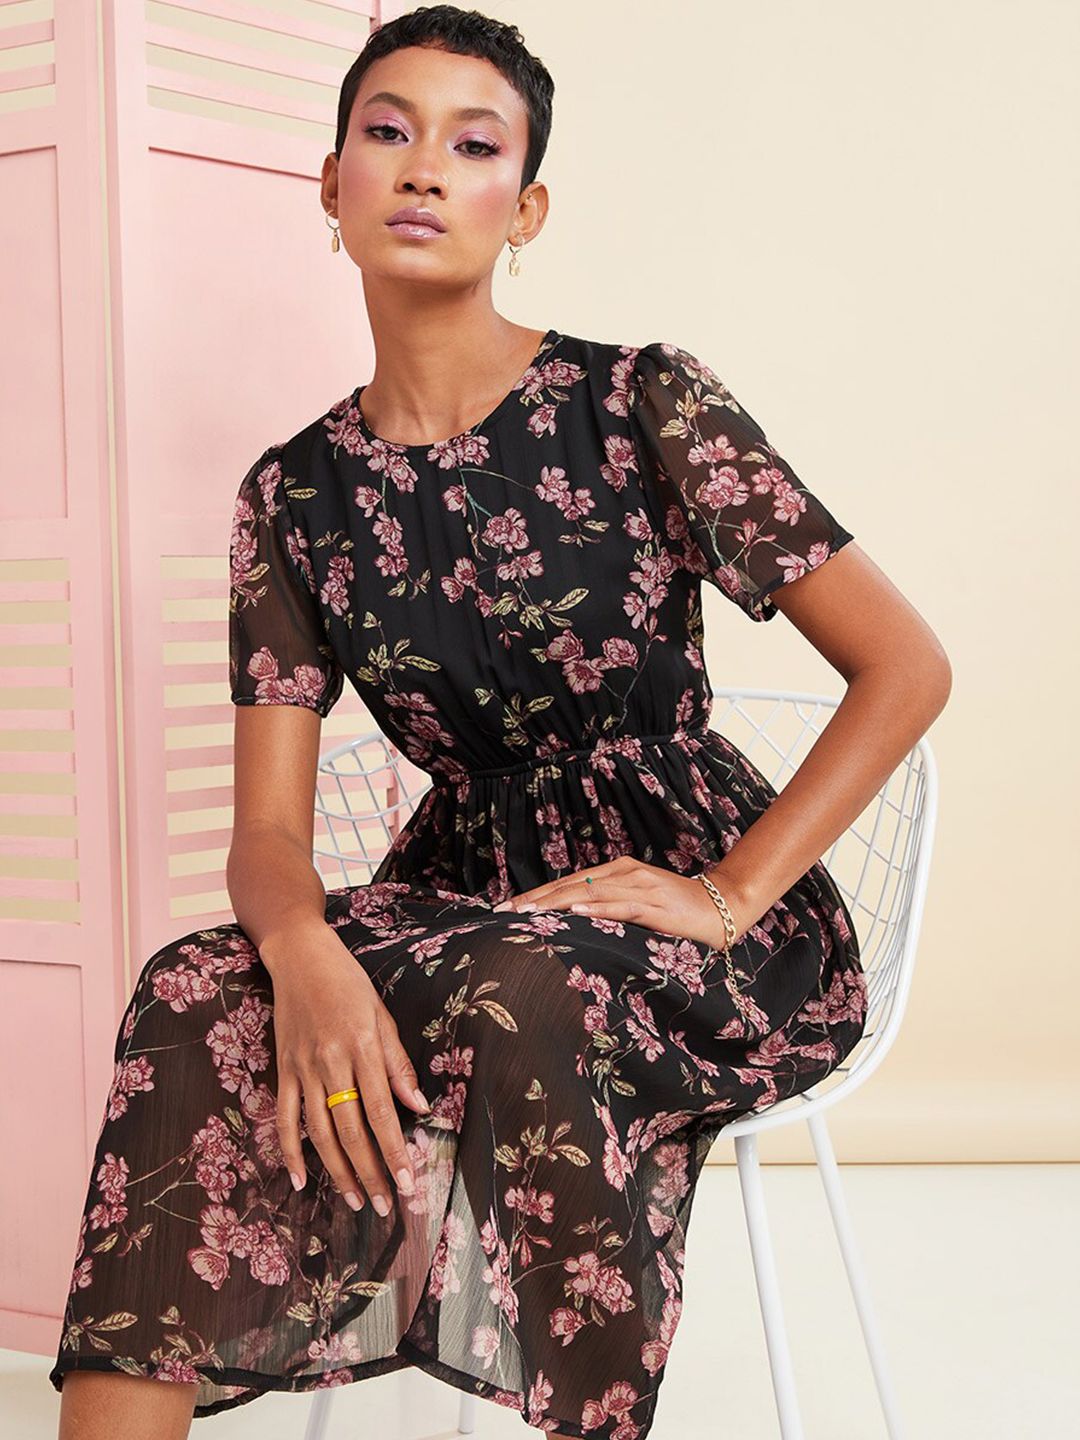 Styli Black Floral Dress Price in India